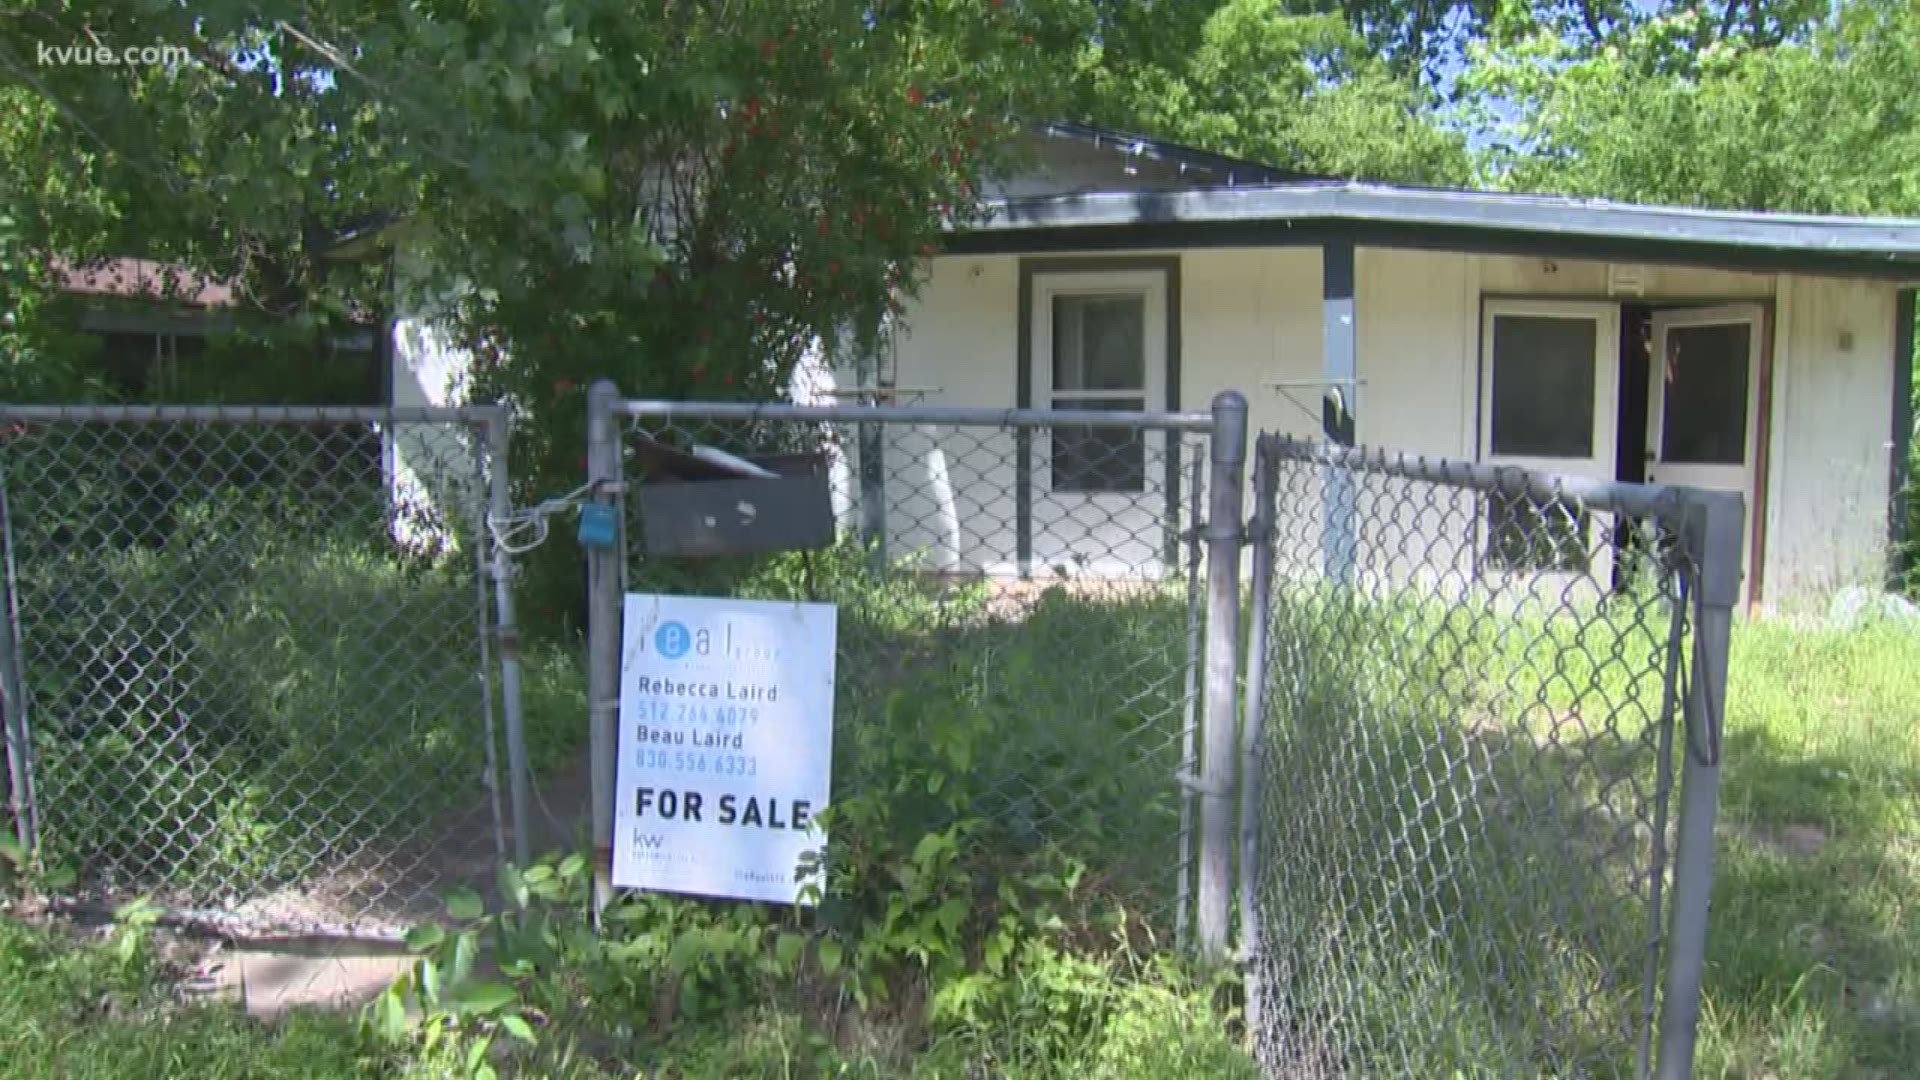 You can now use the crypto currency to buy a house. It's a new thing, and it's happening in Austin. 